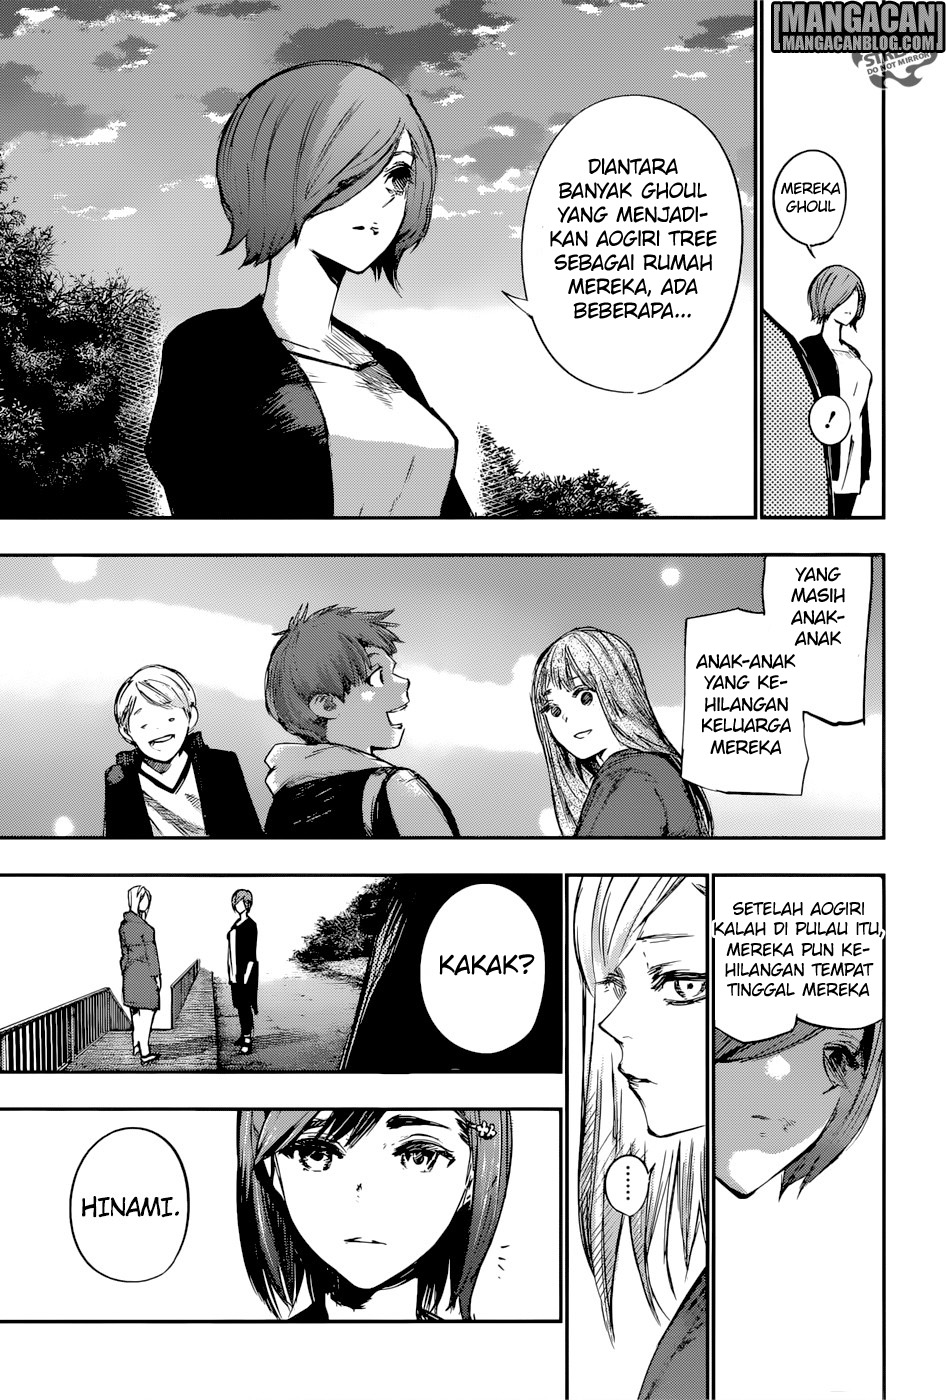 Tokyo Ghoul:re Chapter 120